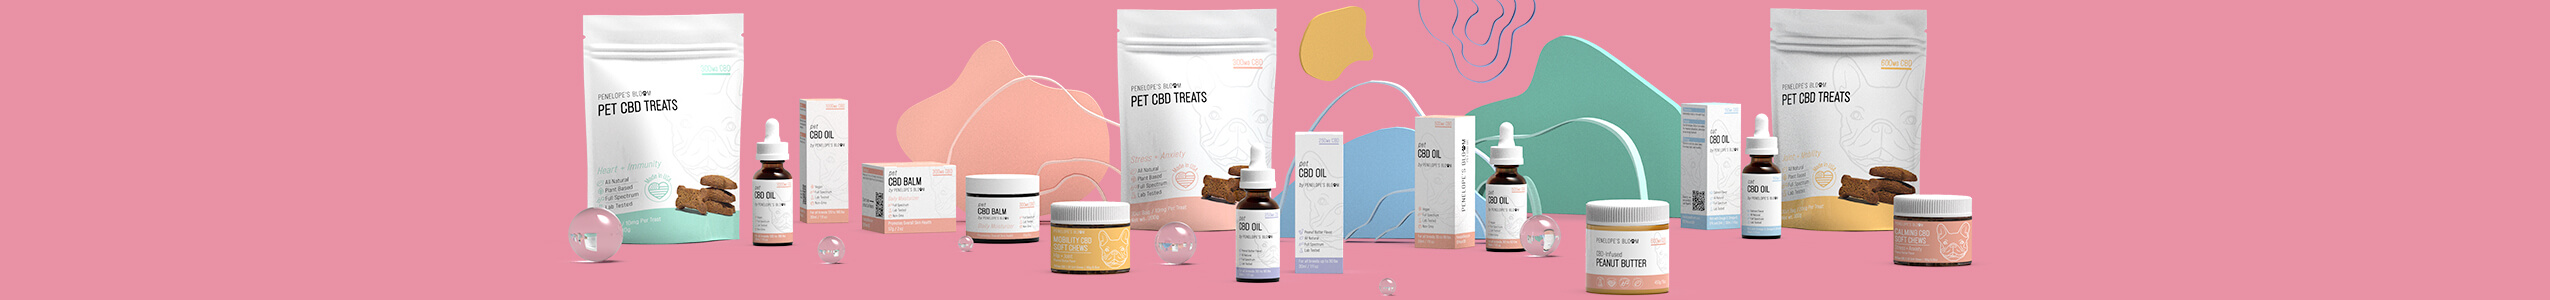 Penelope's Bloom Pet CBD Product Collection